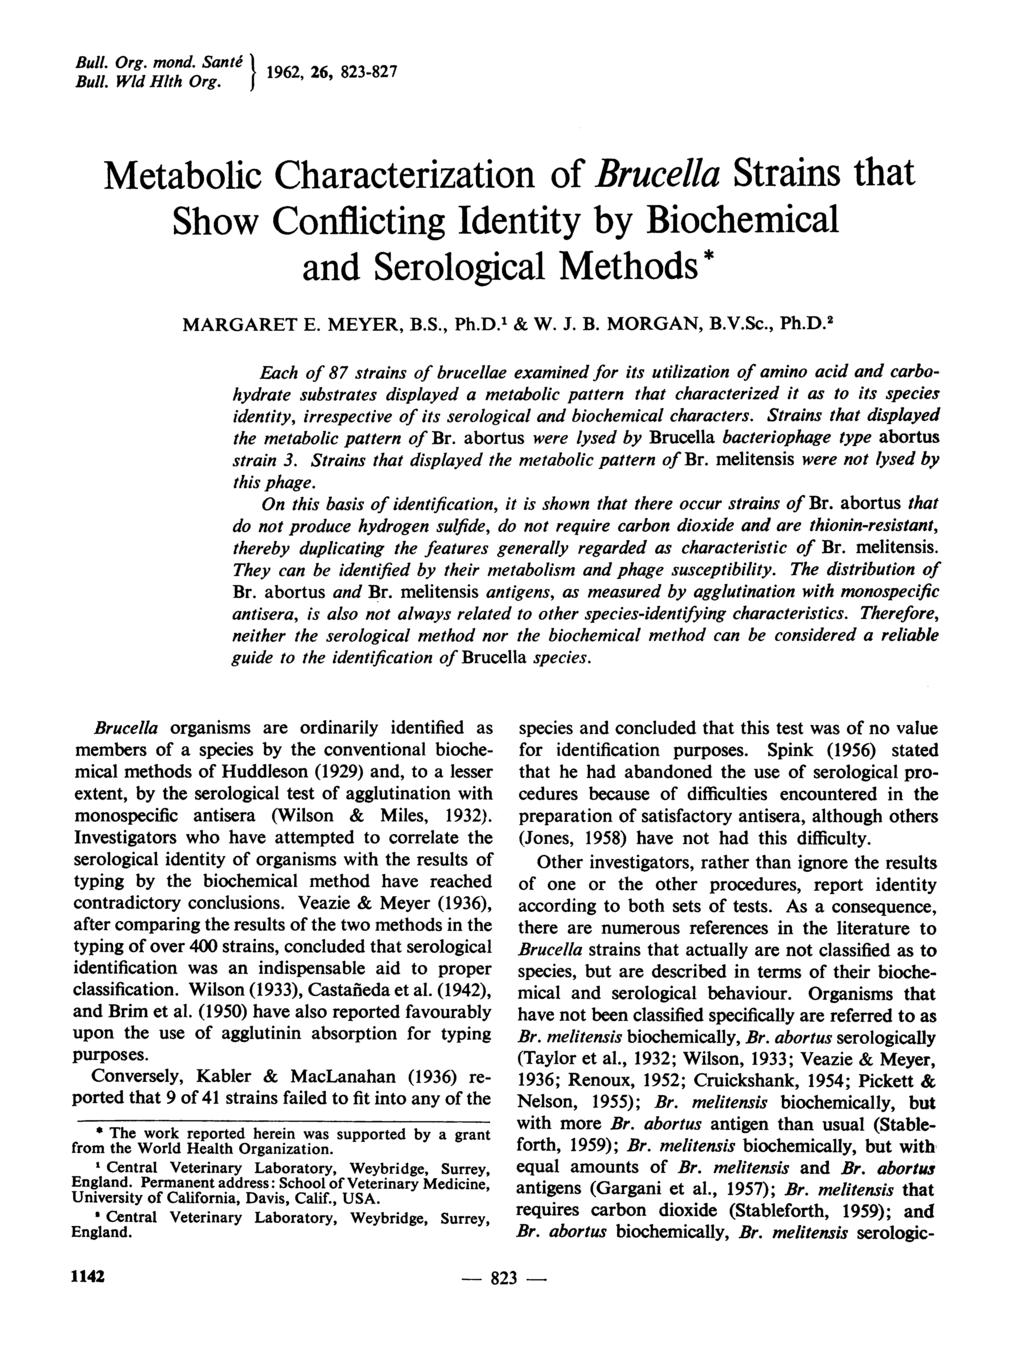 Bull. Org. mond. Sante' 1962, 26, 823-827 Bull. Wld Hlth Org. Metabolic Characterization of Brucella Strains that Show Conflicting Identity by Biochemical and Serological Methods* MARGARET E.